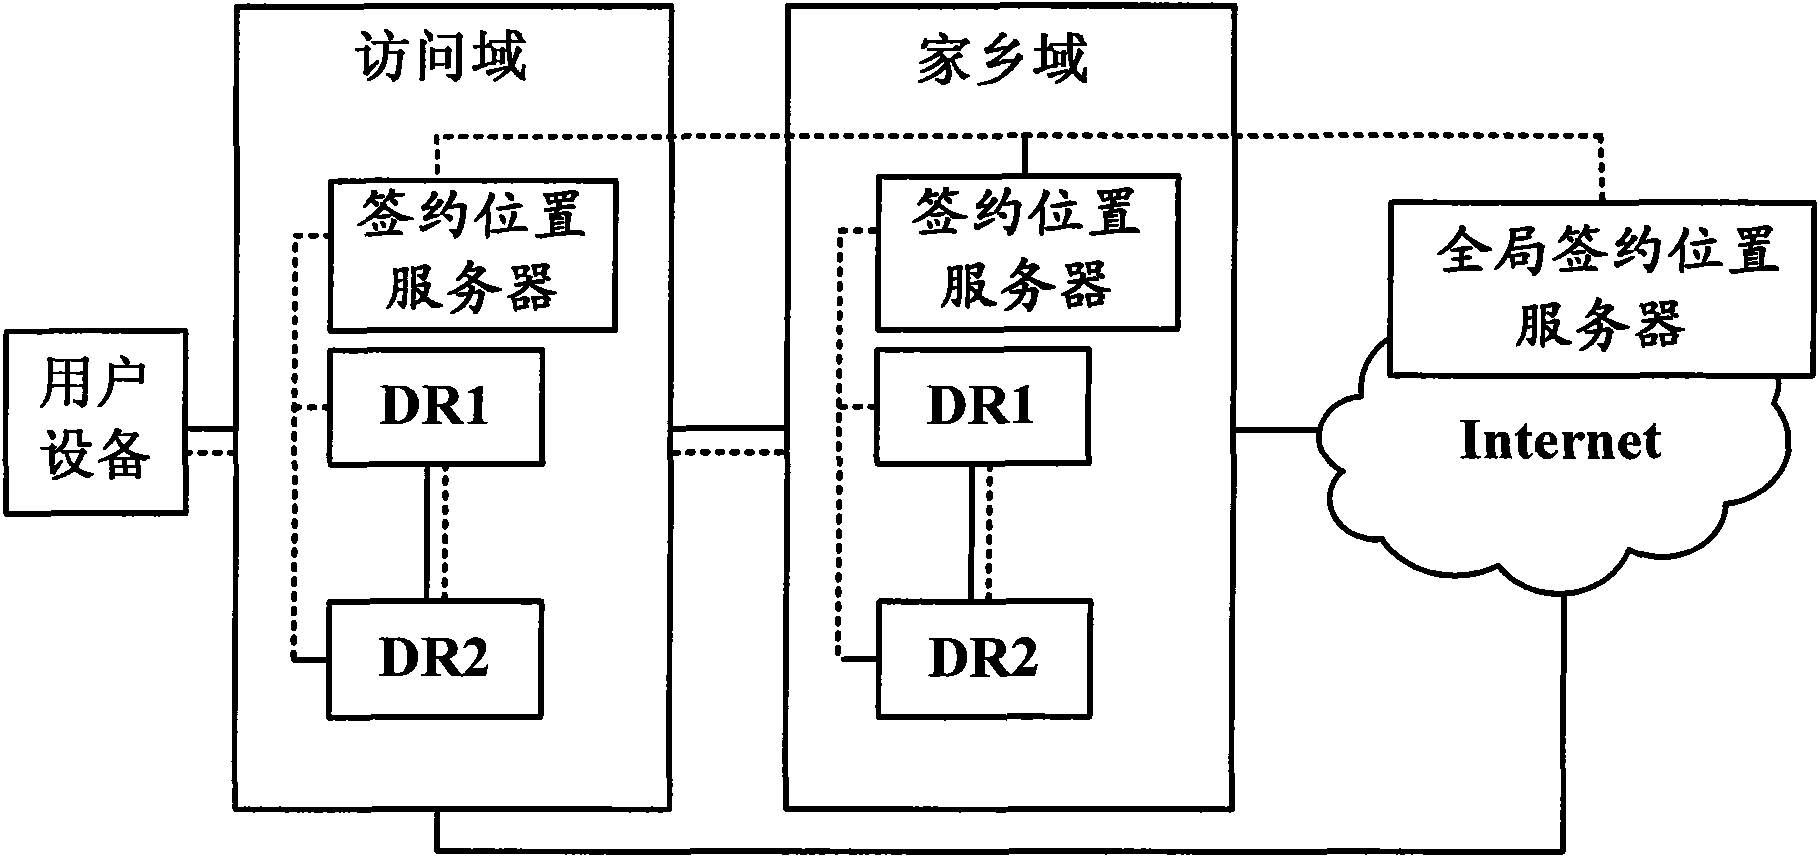 Mobile management method and device